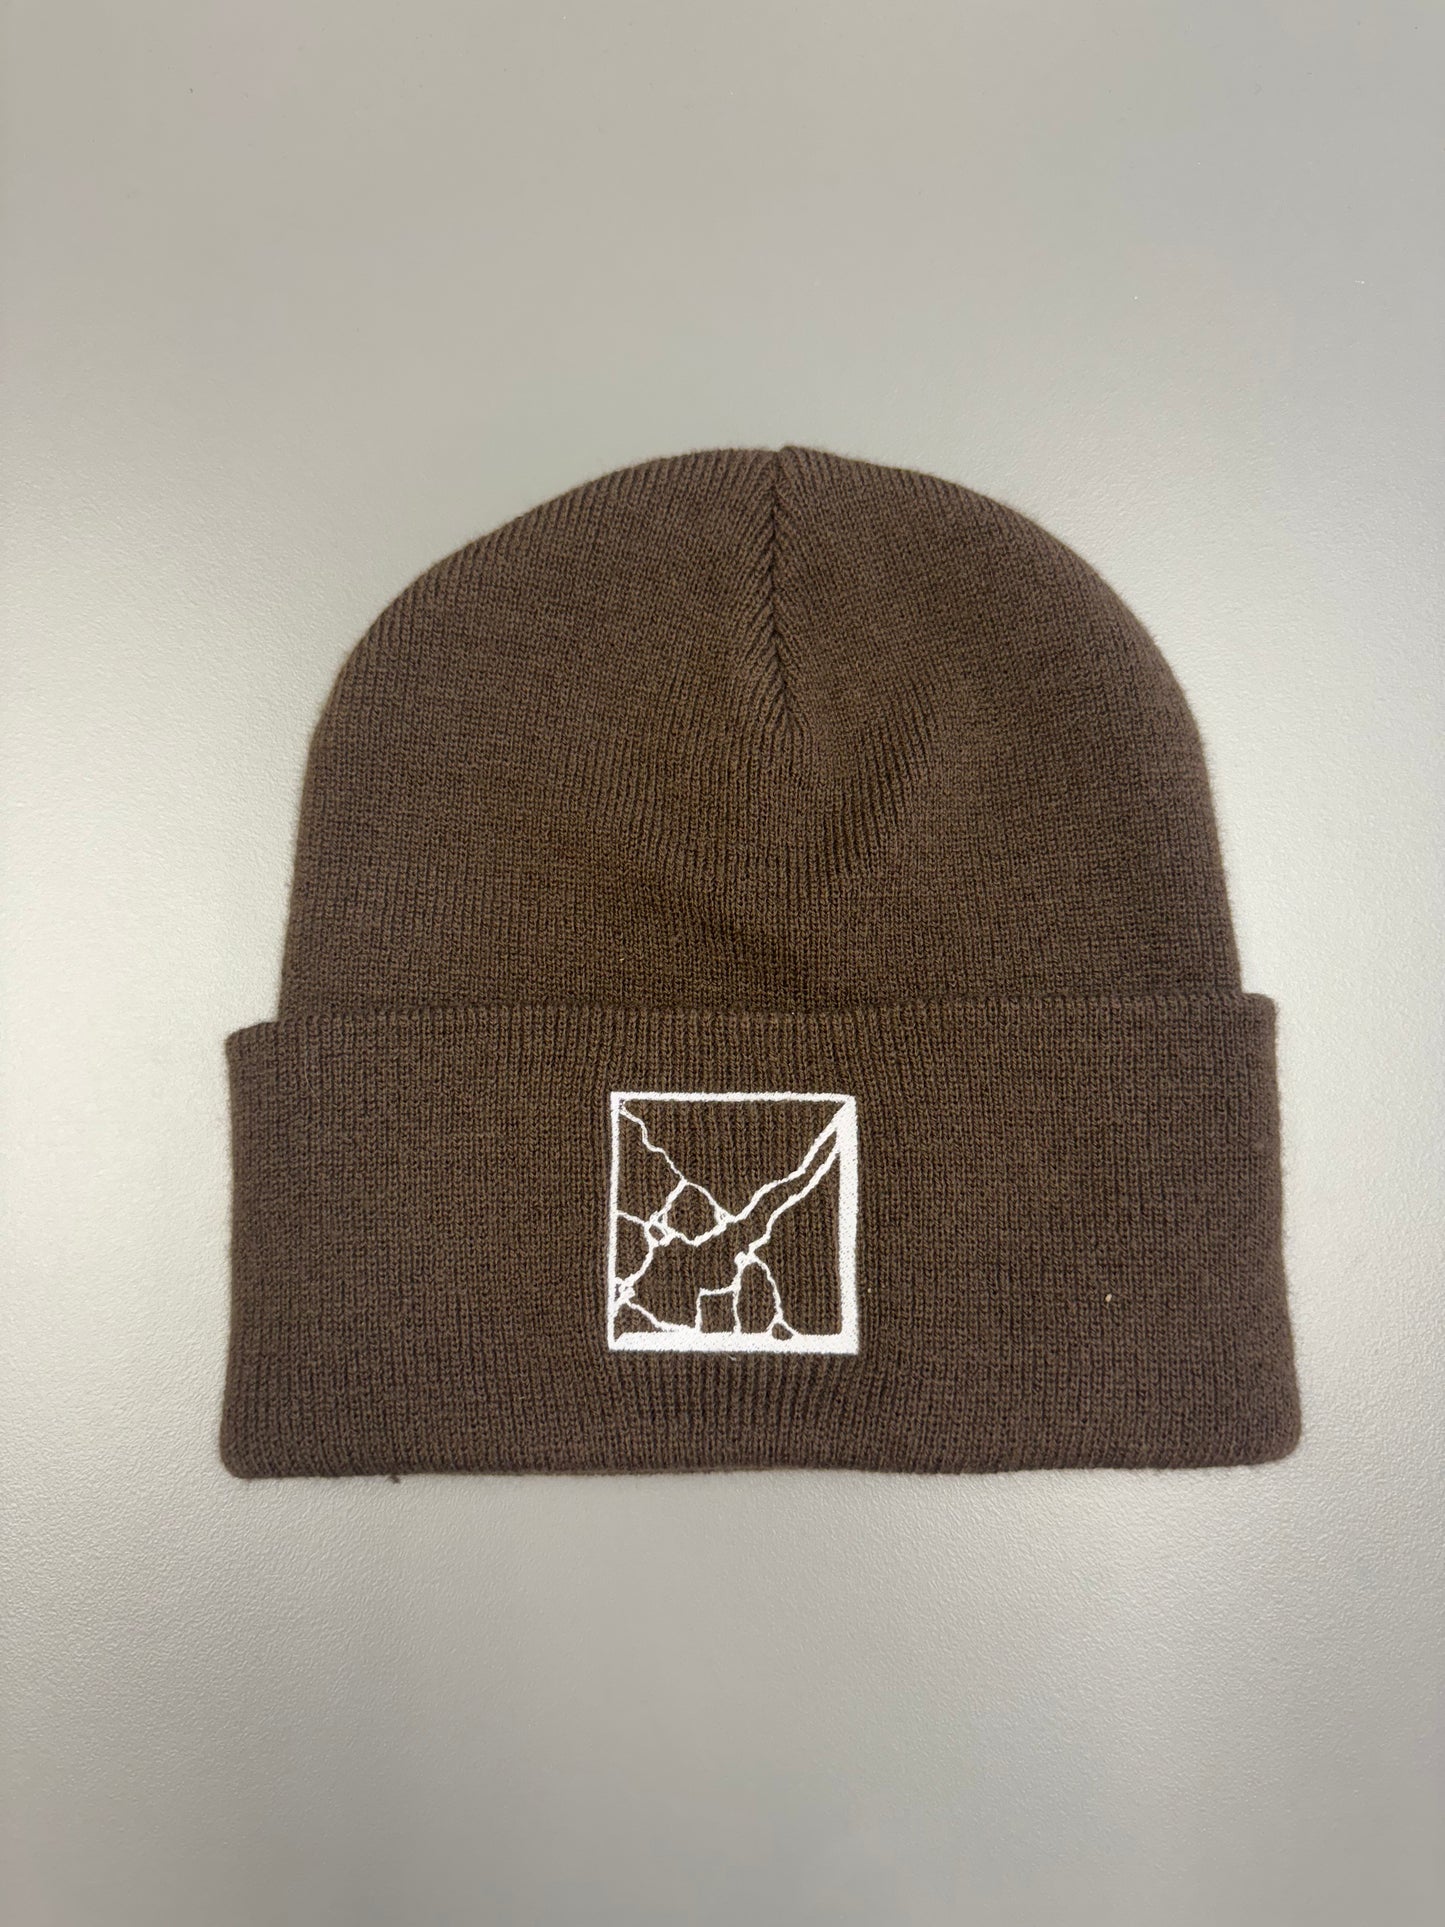 Tile Square - Embroidered Logo Beanie Brown